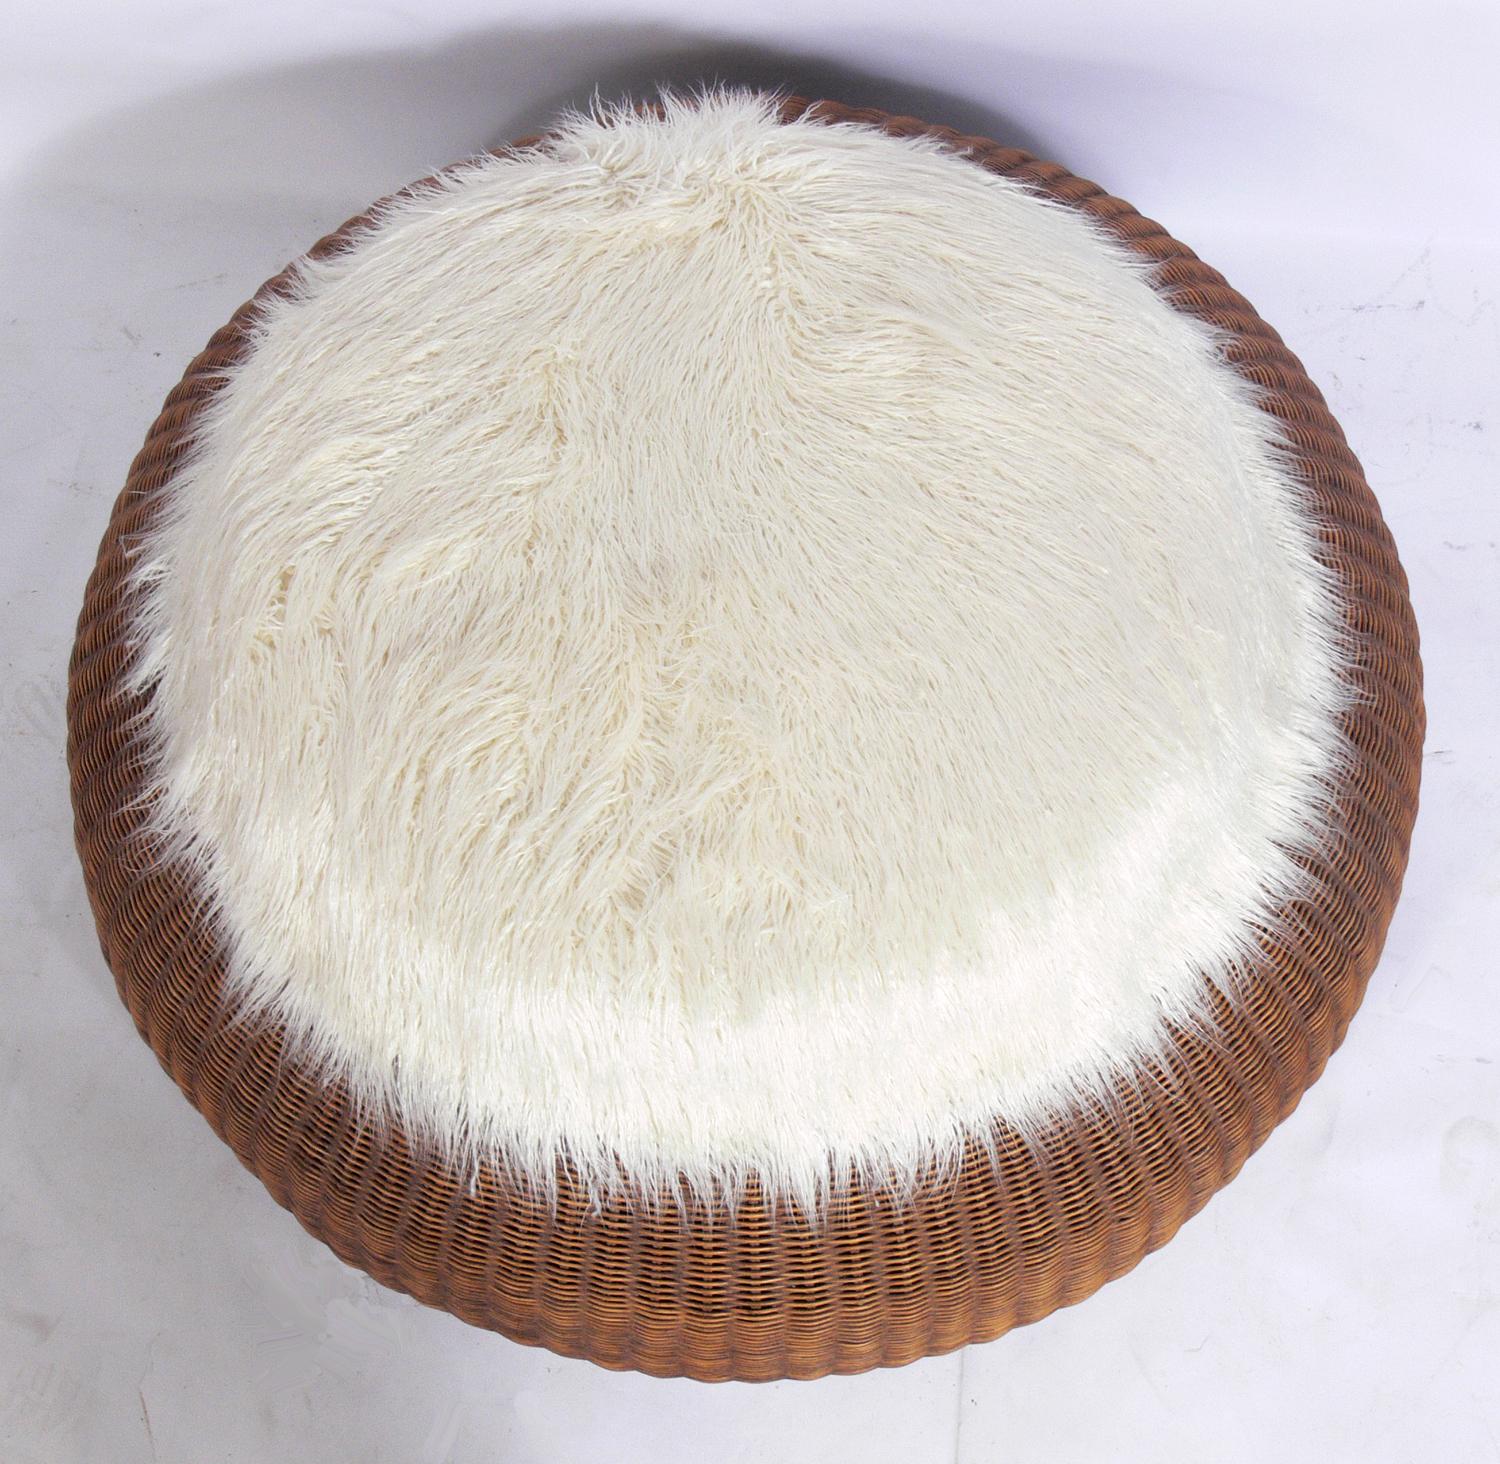 Sculptural rattan ottoman, in the manner of Isamu Kenmochi, circa 1960s. It retains its warm original patina. It has been recently reupholstered in a plush faux Mongolian sheepskin.